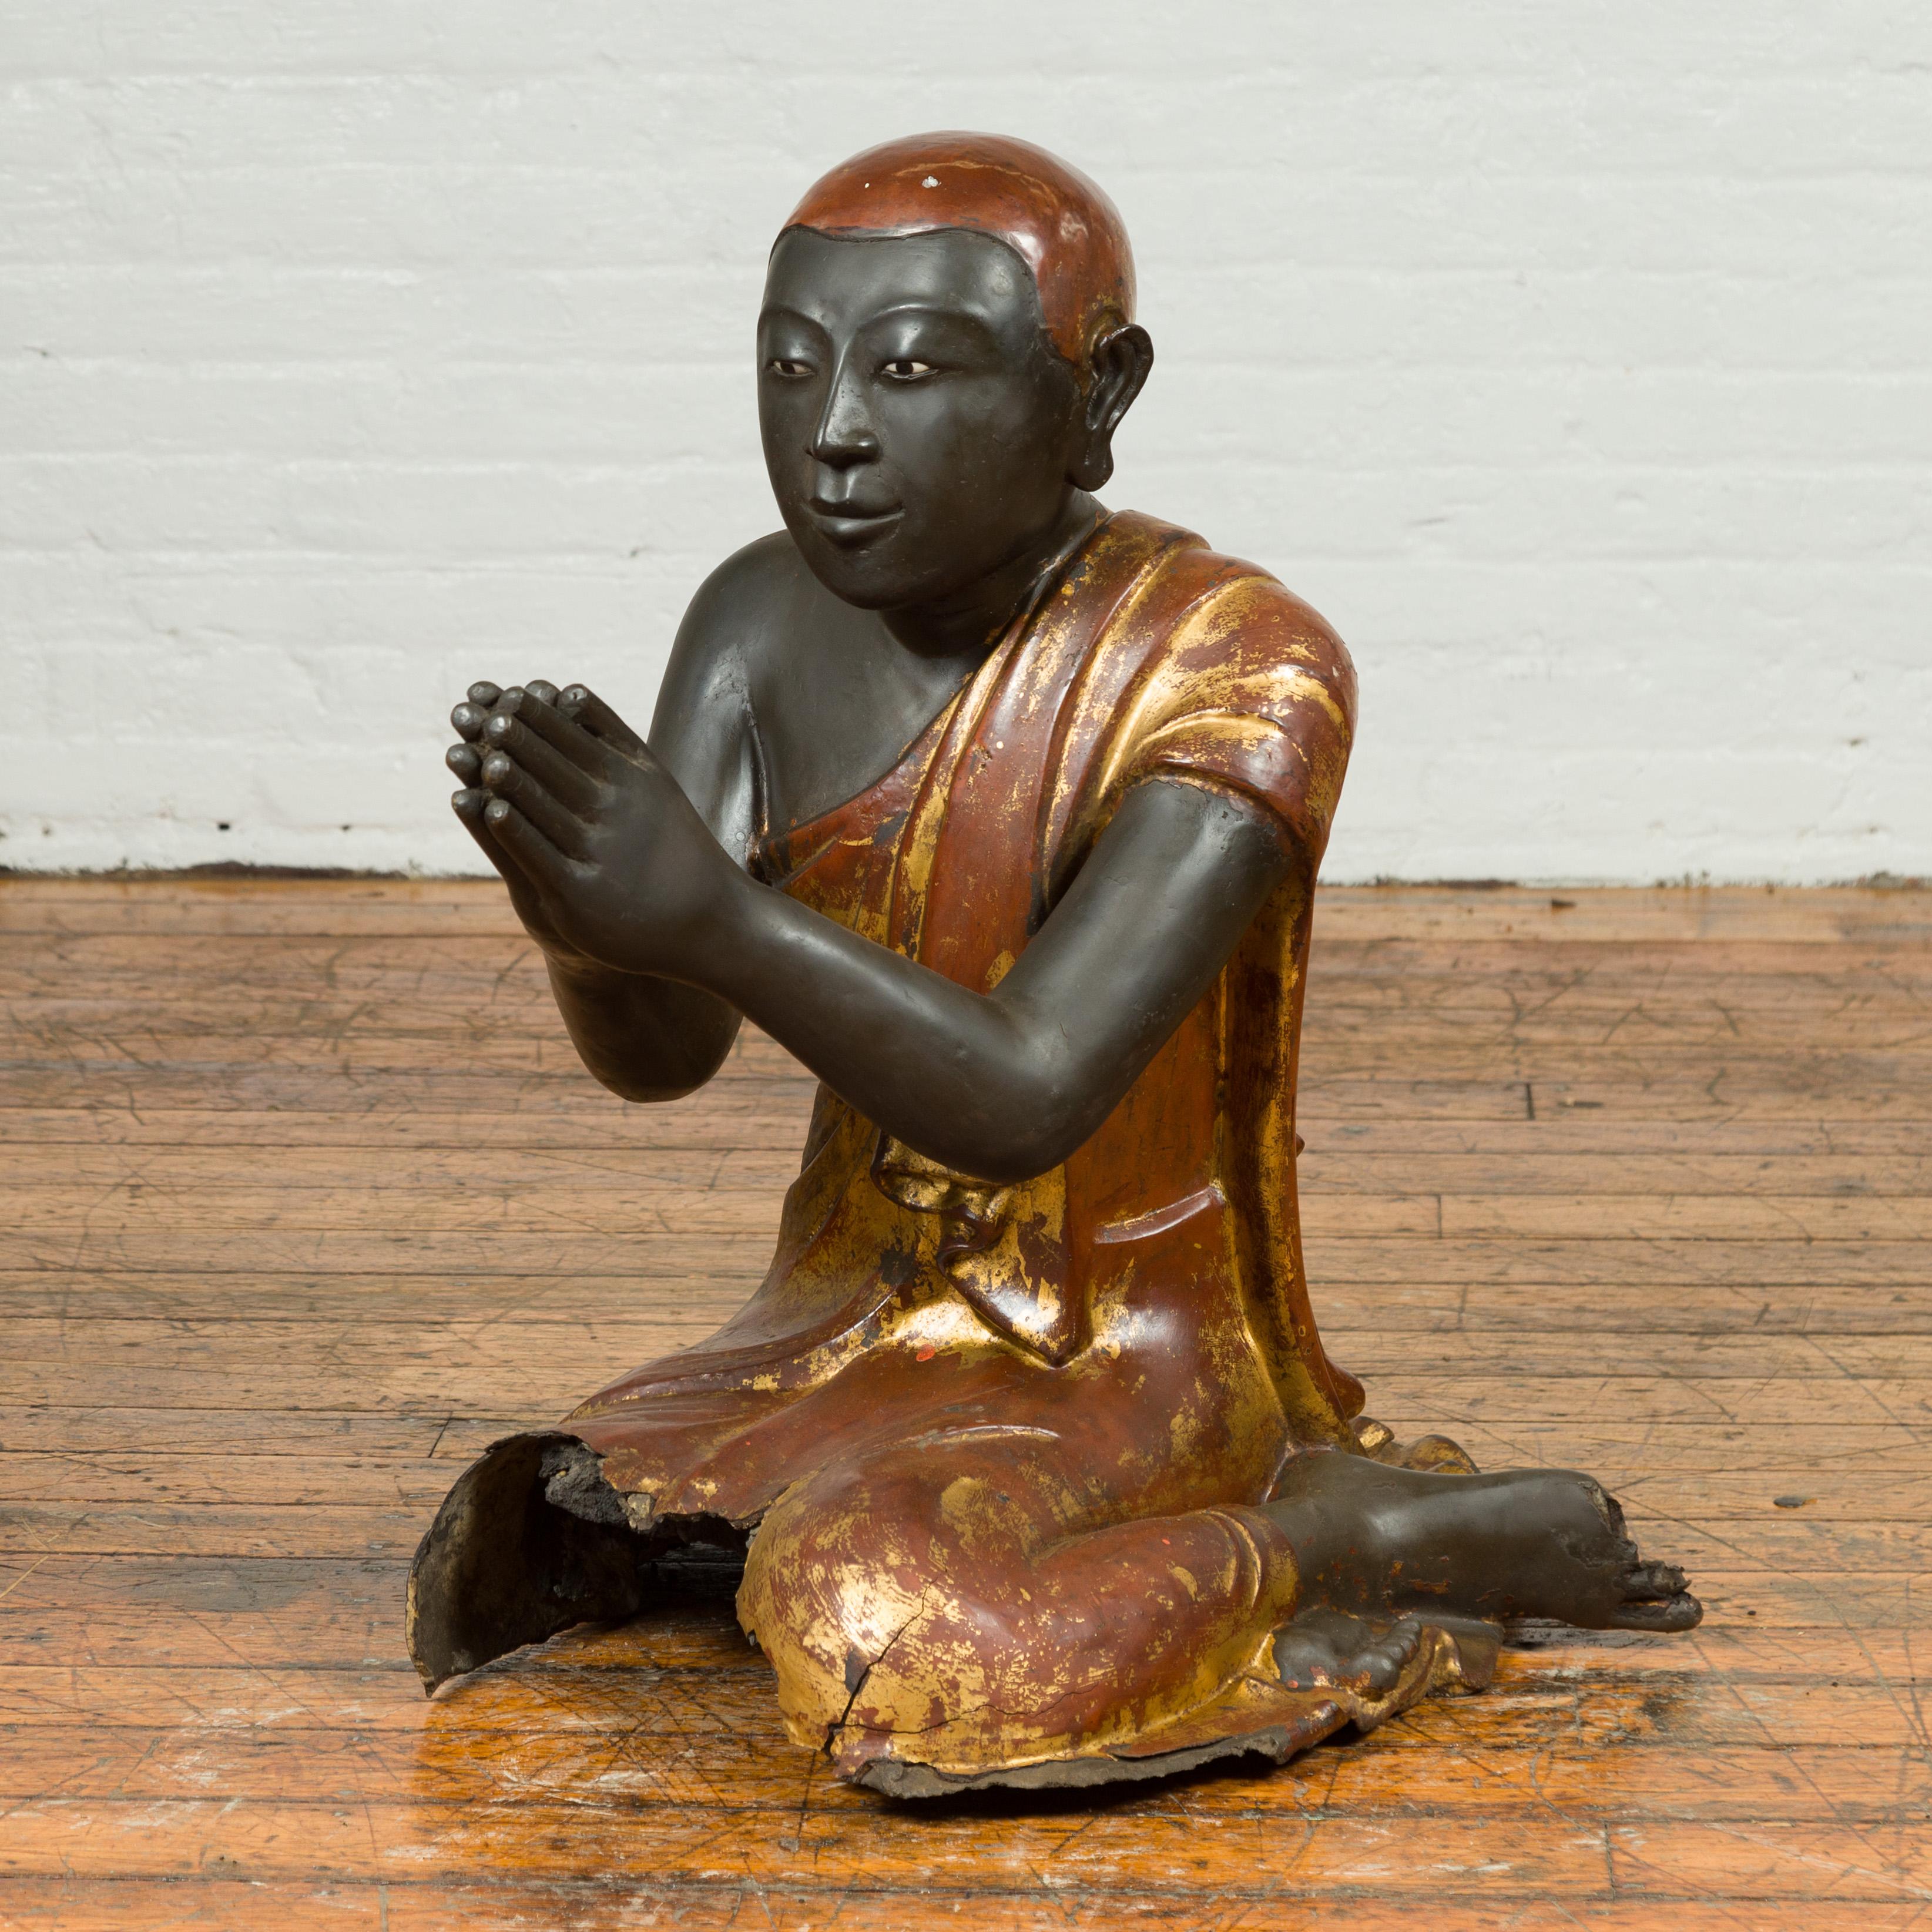 A Thai kneeling ceremonial monk sculpture from the 20th century with hand painted gilt and lacquer over stone. This 20th-century Thai kneeling ceremonial monk sculpture, sourced from a temple, is an authentic piece of Southeast Asian art. With its